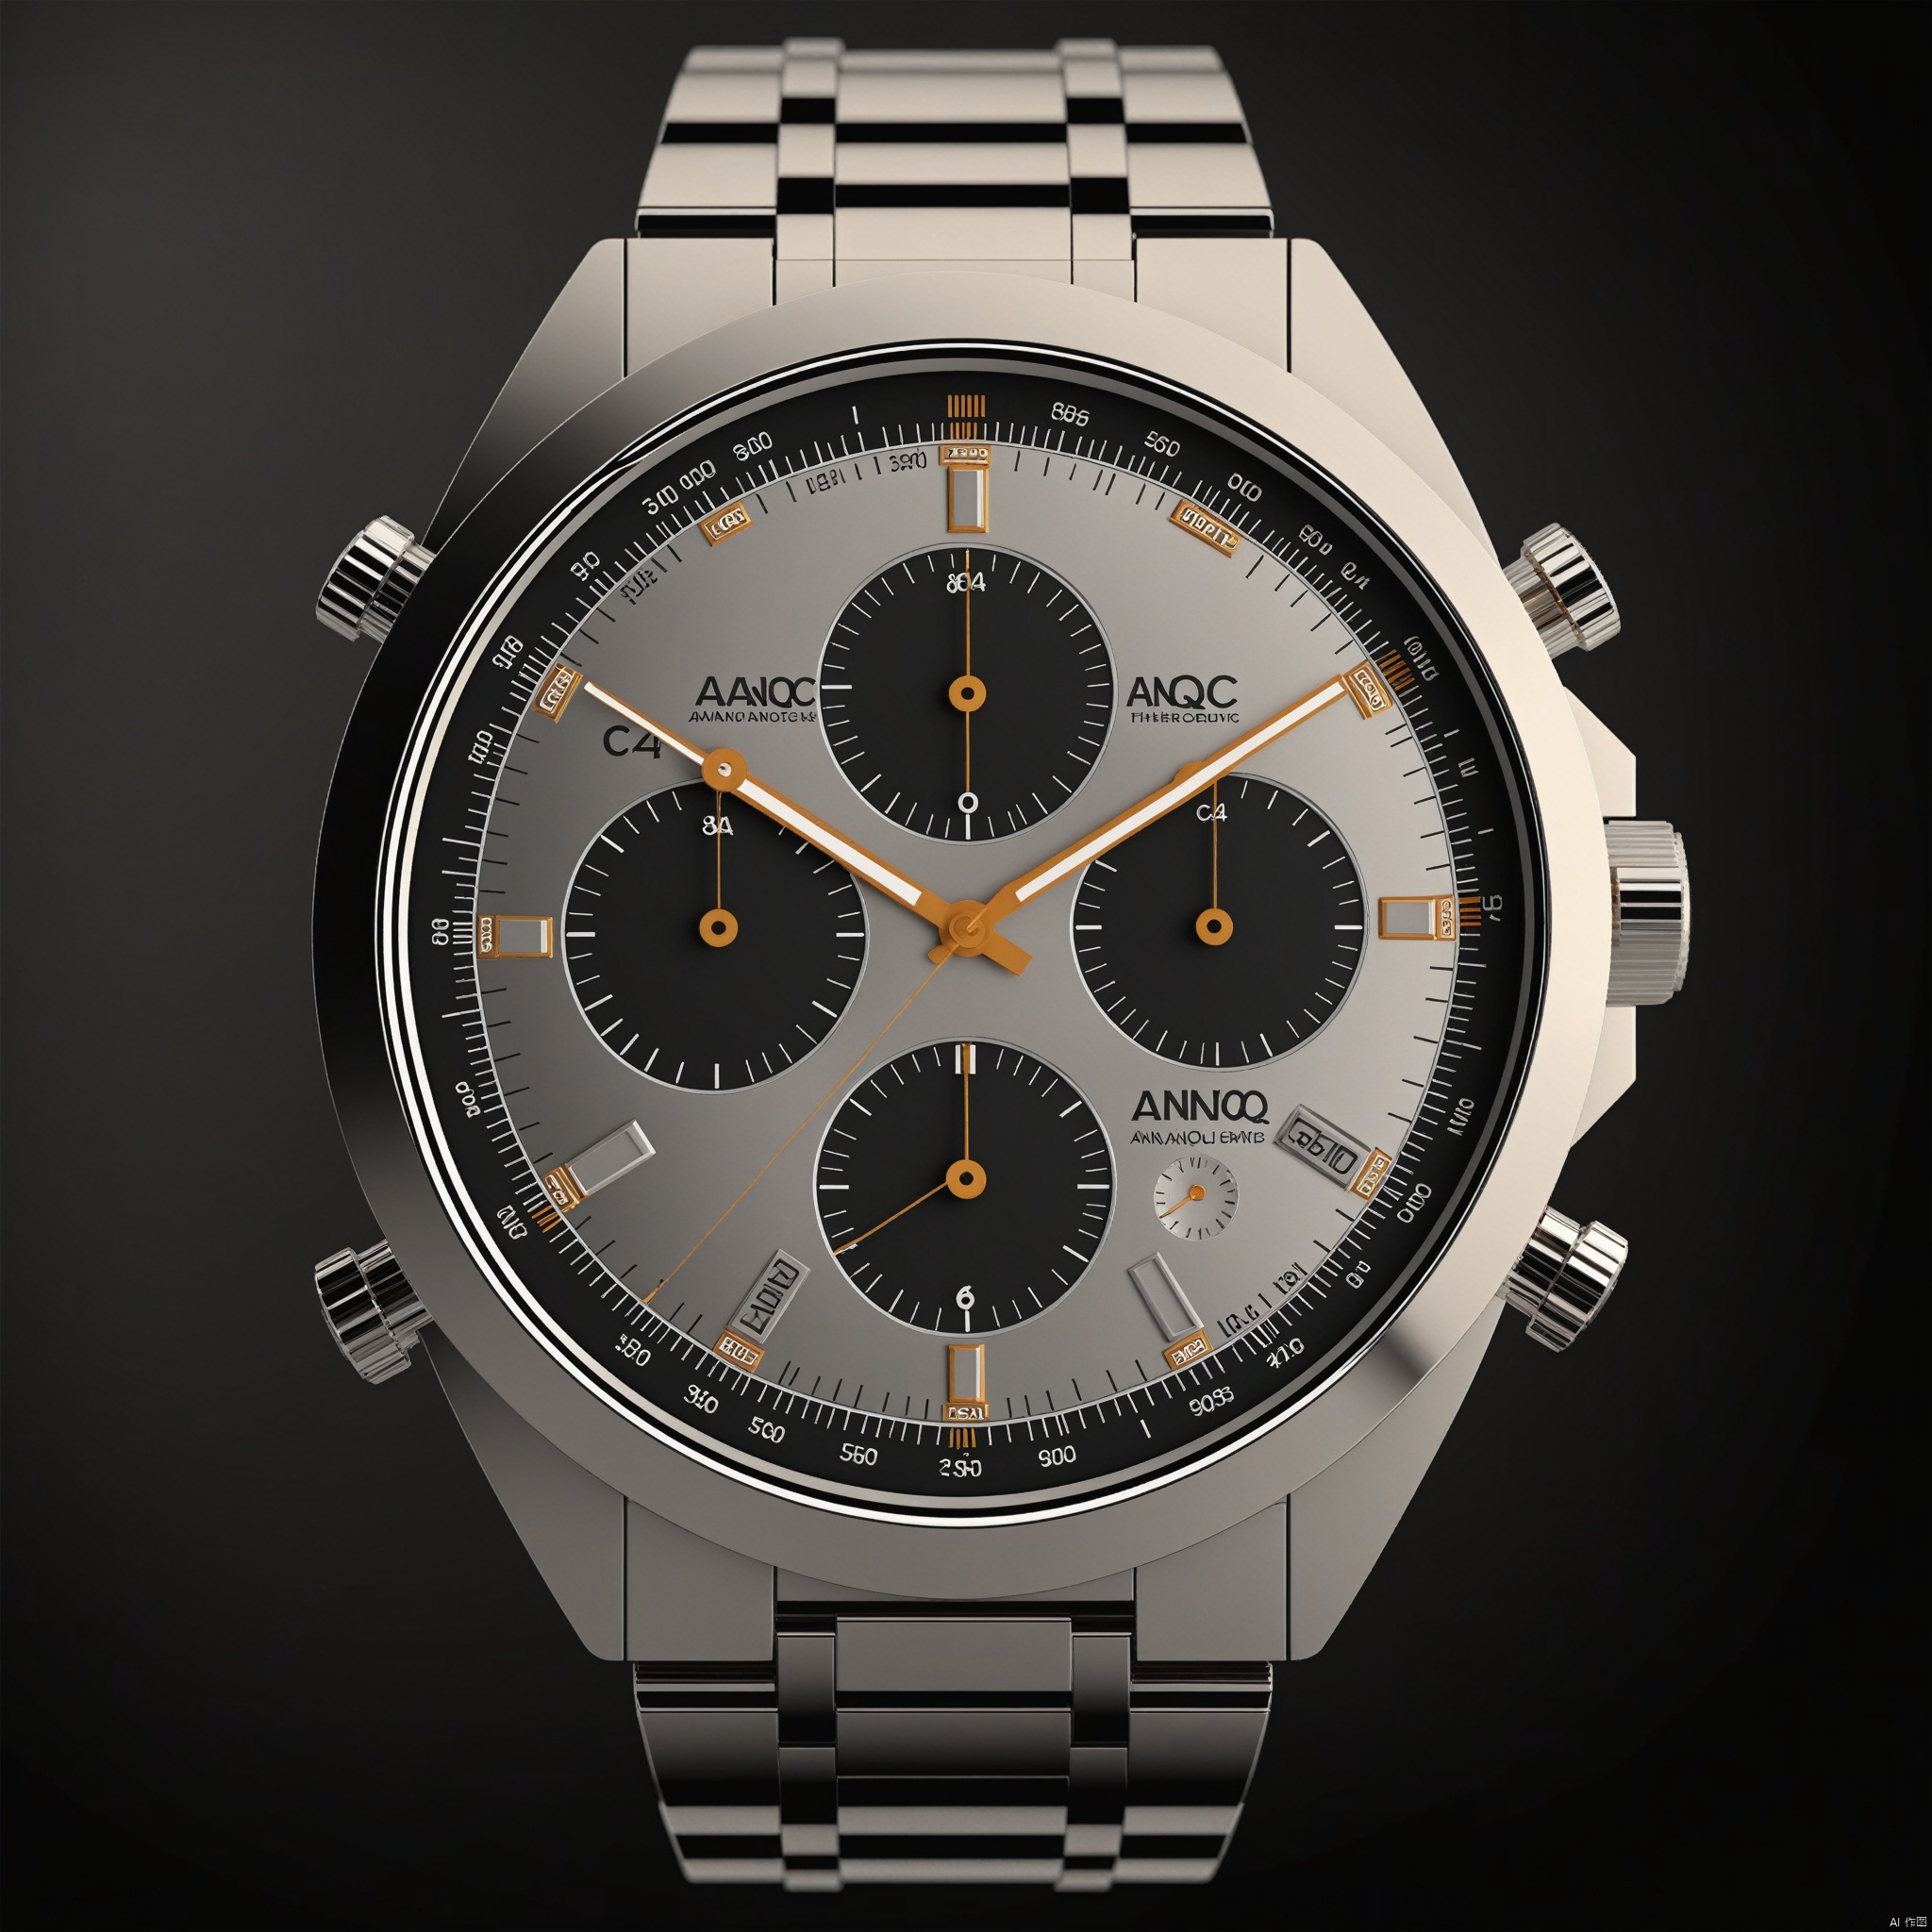 The wristwatch has a classic and elegant design with a round face and a metal band. The face is color with silver accents, and the band is silver. big watch bezel with a tachymeter. The watch has a variety of features, including a chronograph, and a date display. front view, classic style, showcasing complete wristwatch, C4D render, 8K., Advertising-inspired photography style, with close-ups in the style of product photos, Add details, enhance details, ananqc,anantz, product render, , 35mm film photography, heise, LuxTechAI